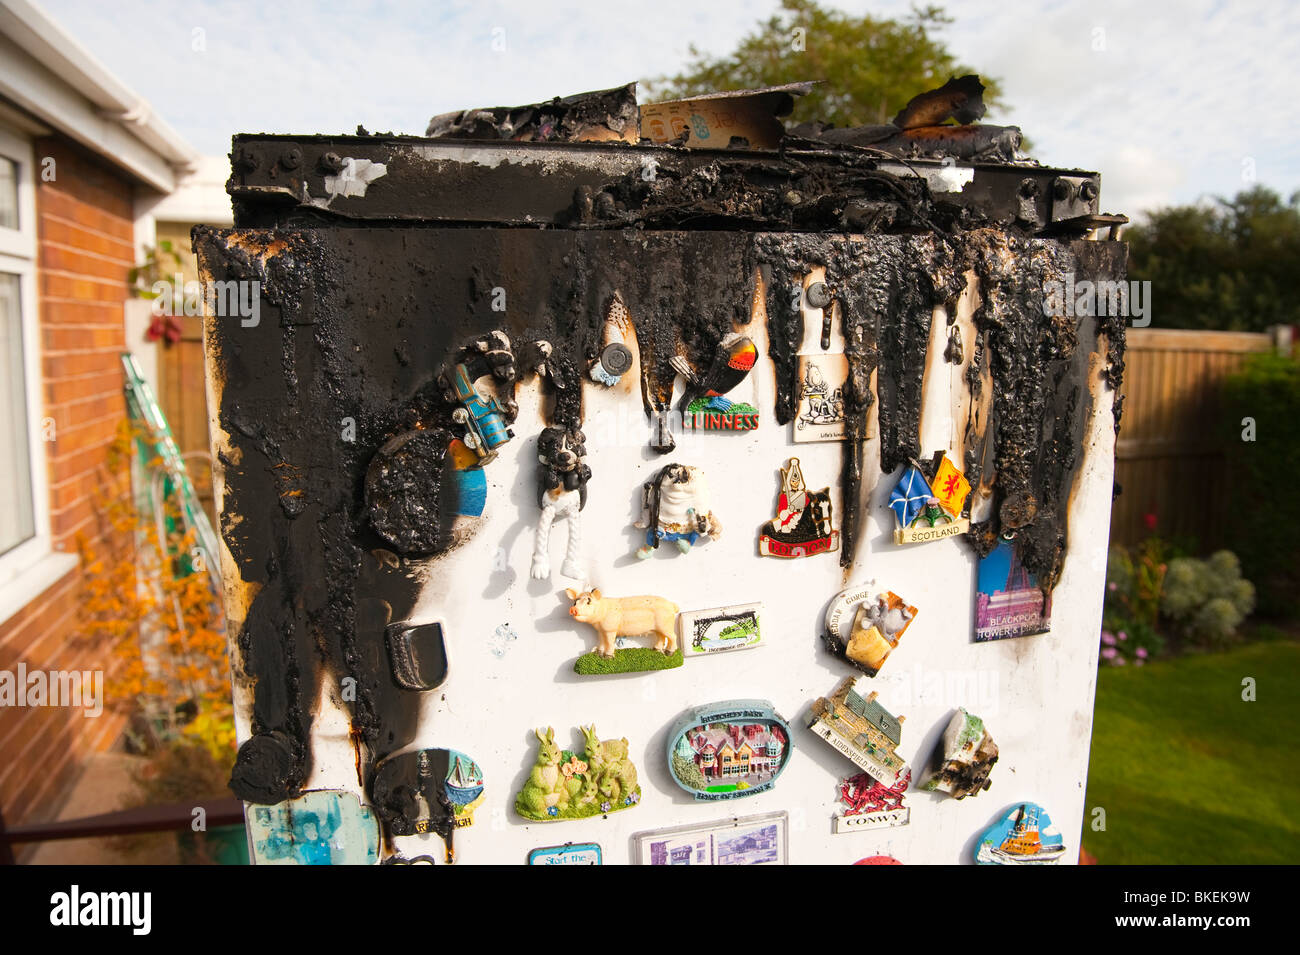 Domestic fridge freezer melted and burnt following fire caused by electrical control panel fault Stock Photo